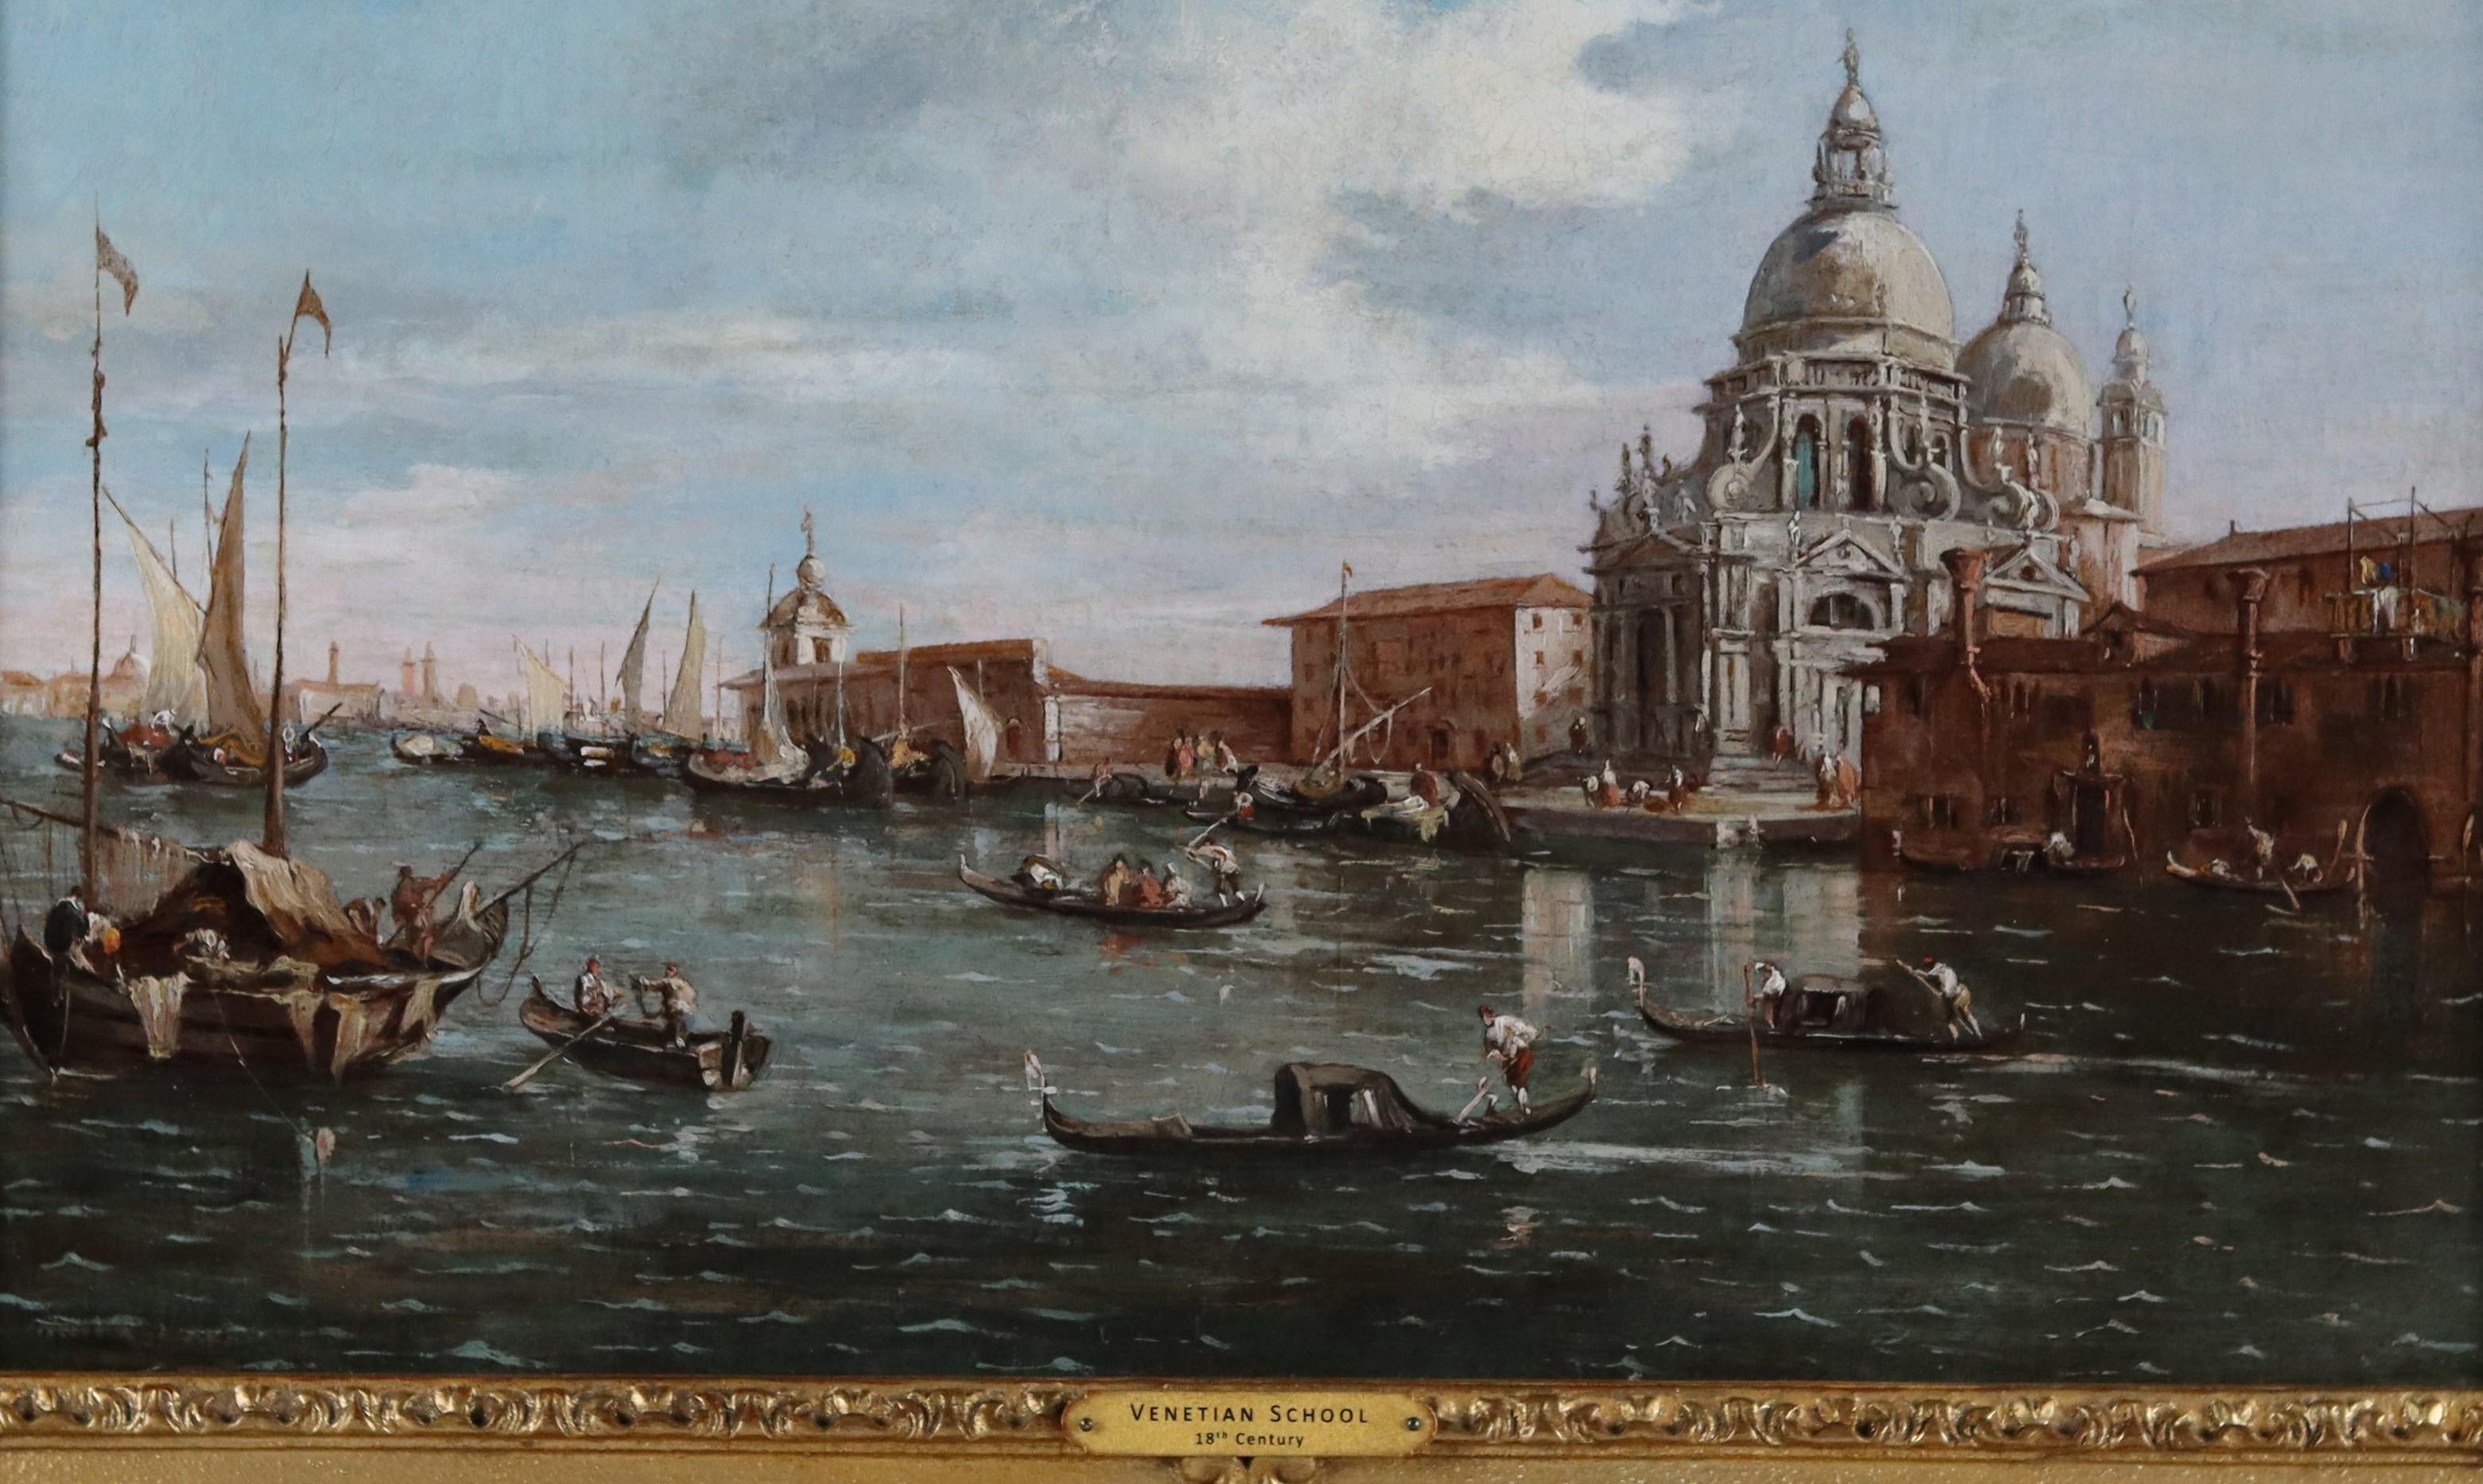 A Pair of 18th century Venetian Canal Scenes in the Style of Francesco Guardi   For Sale 2